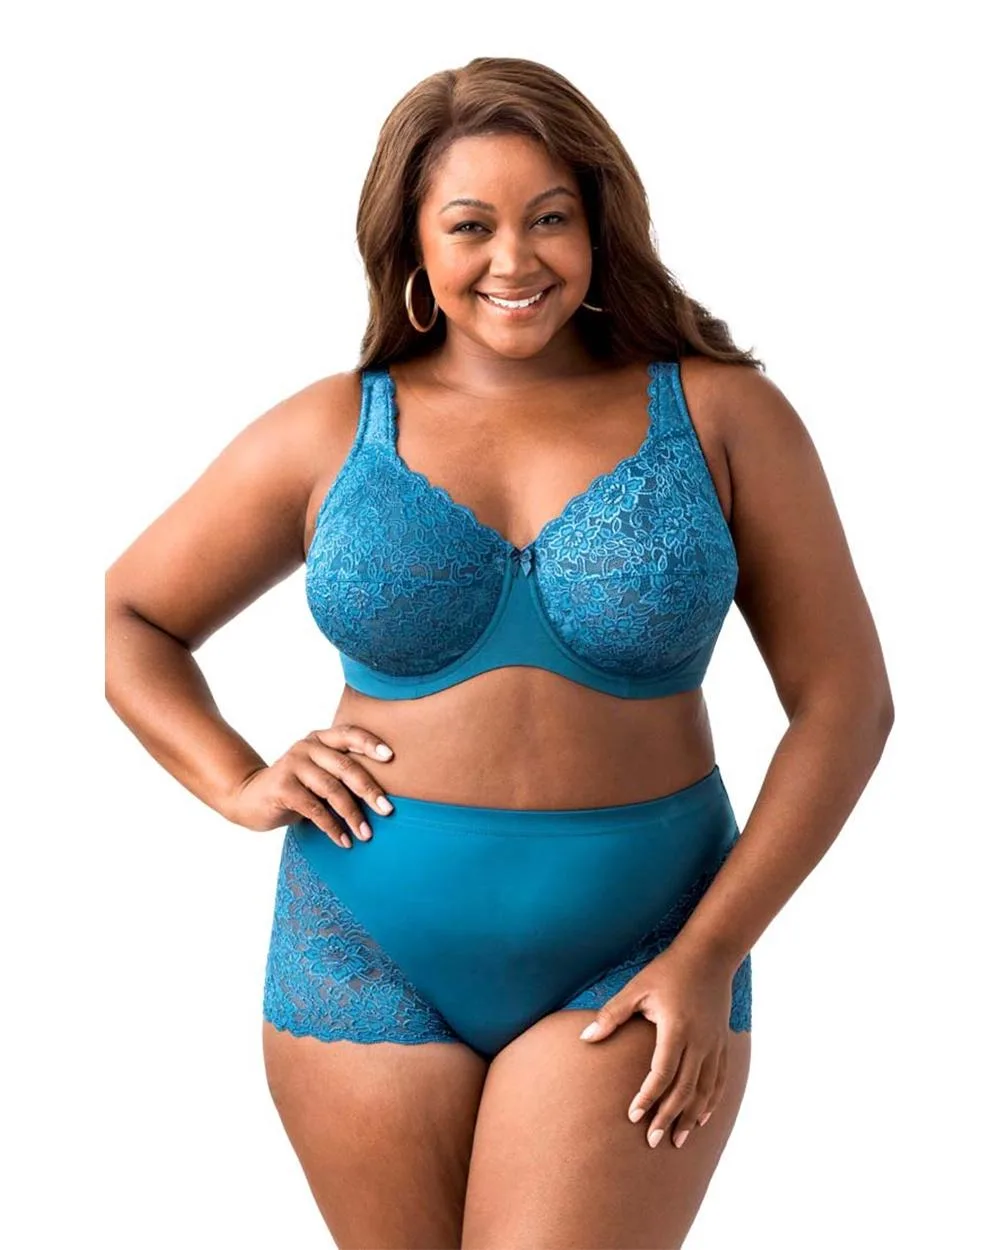 Elila Lacey Curves Underwire Bra 2311 Teal